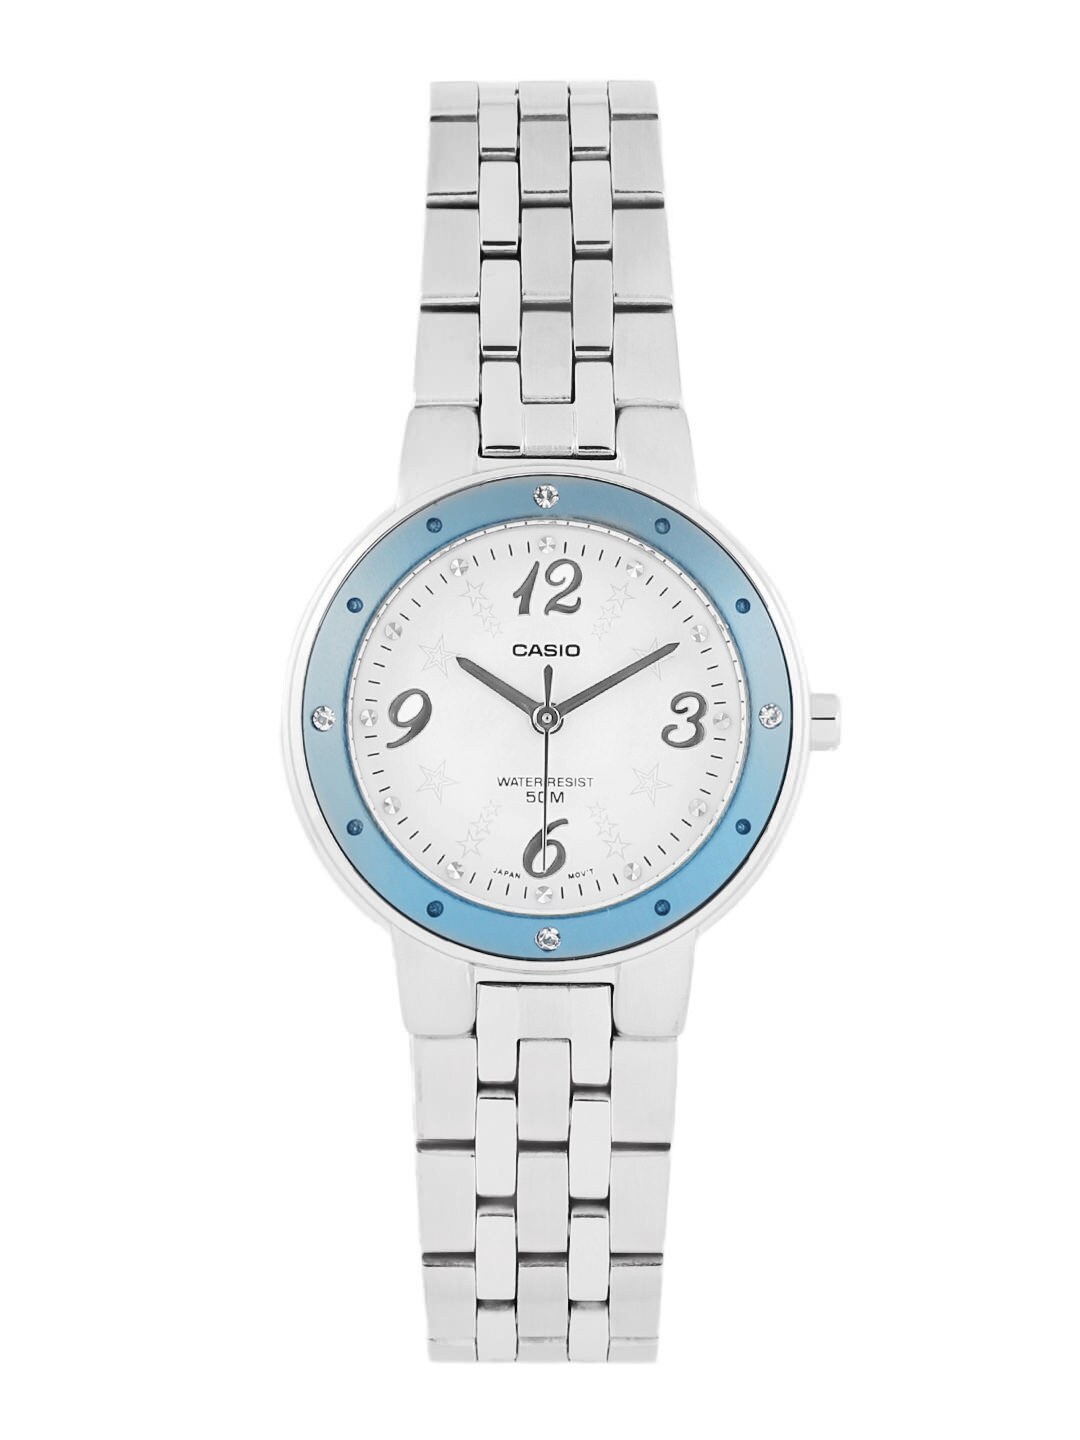 CASIO Enticer Women White Dial Analogue Watch A670